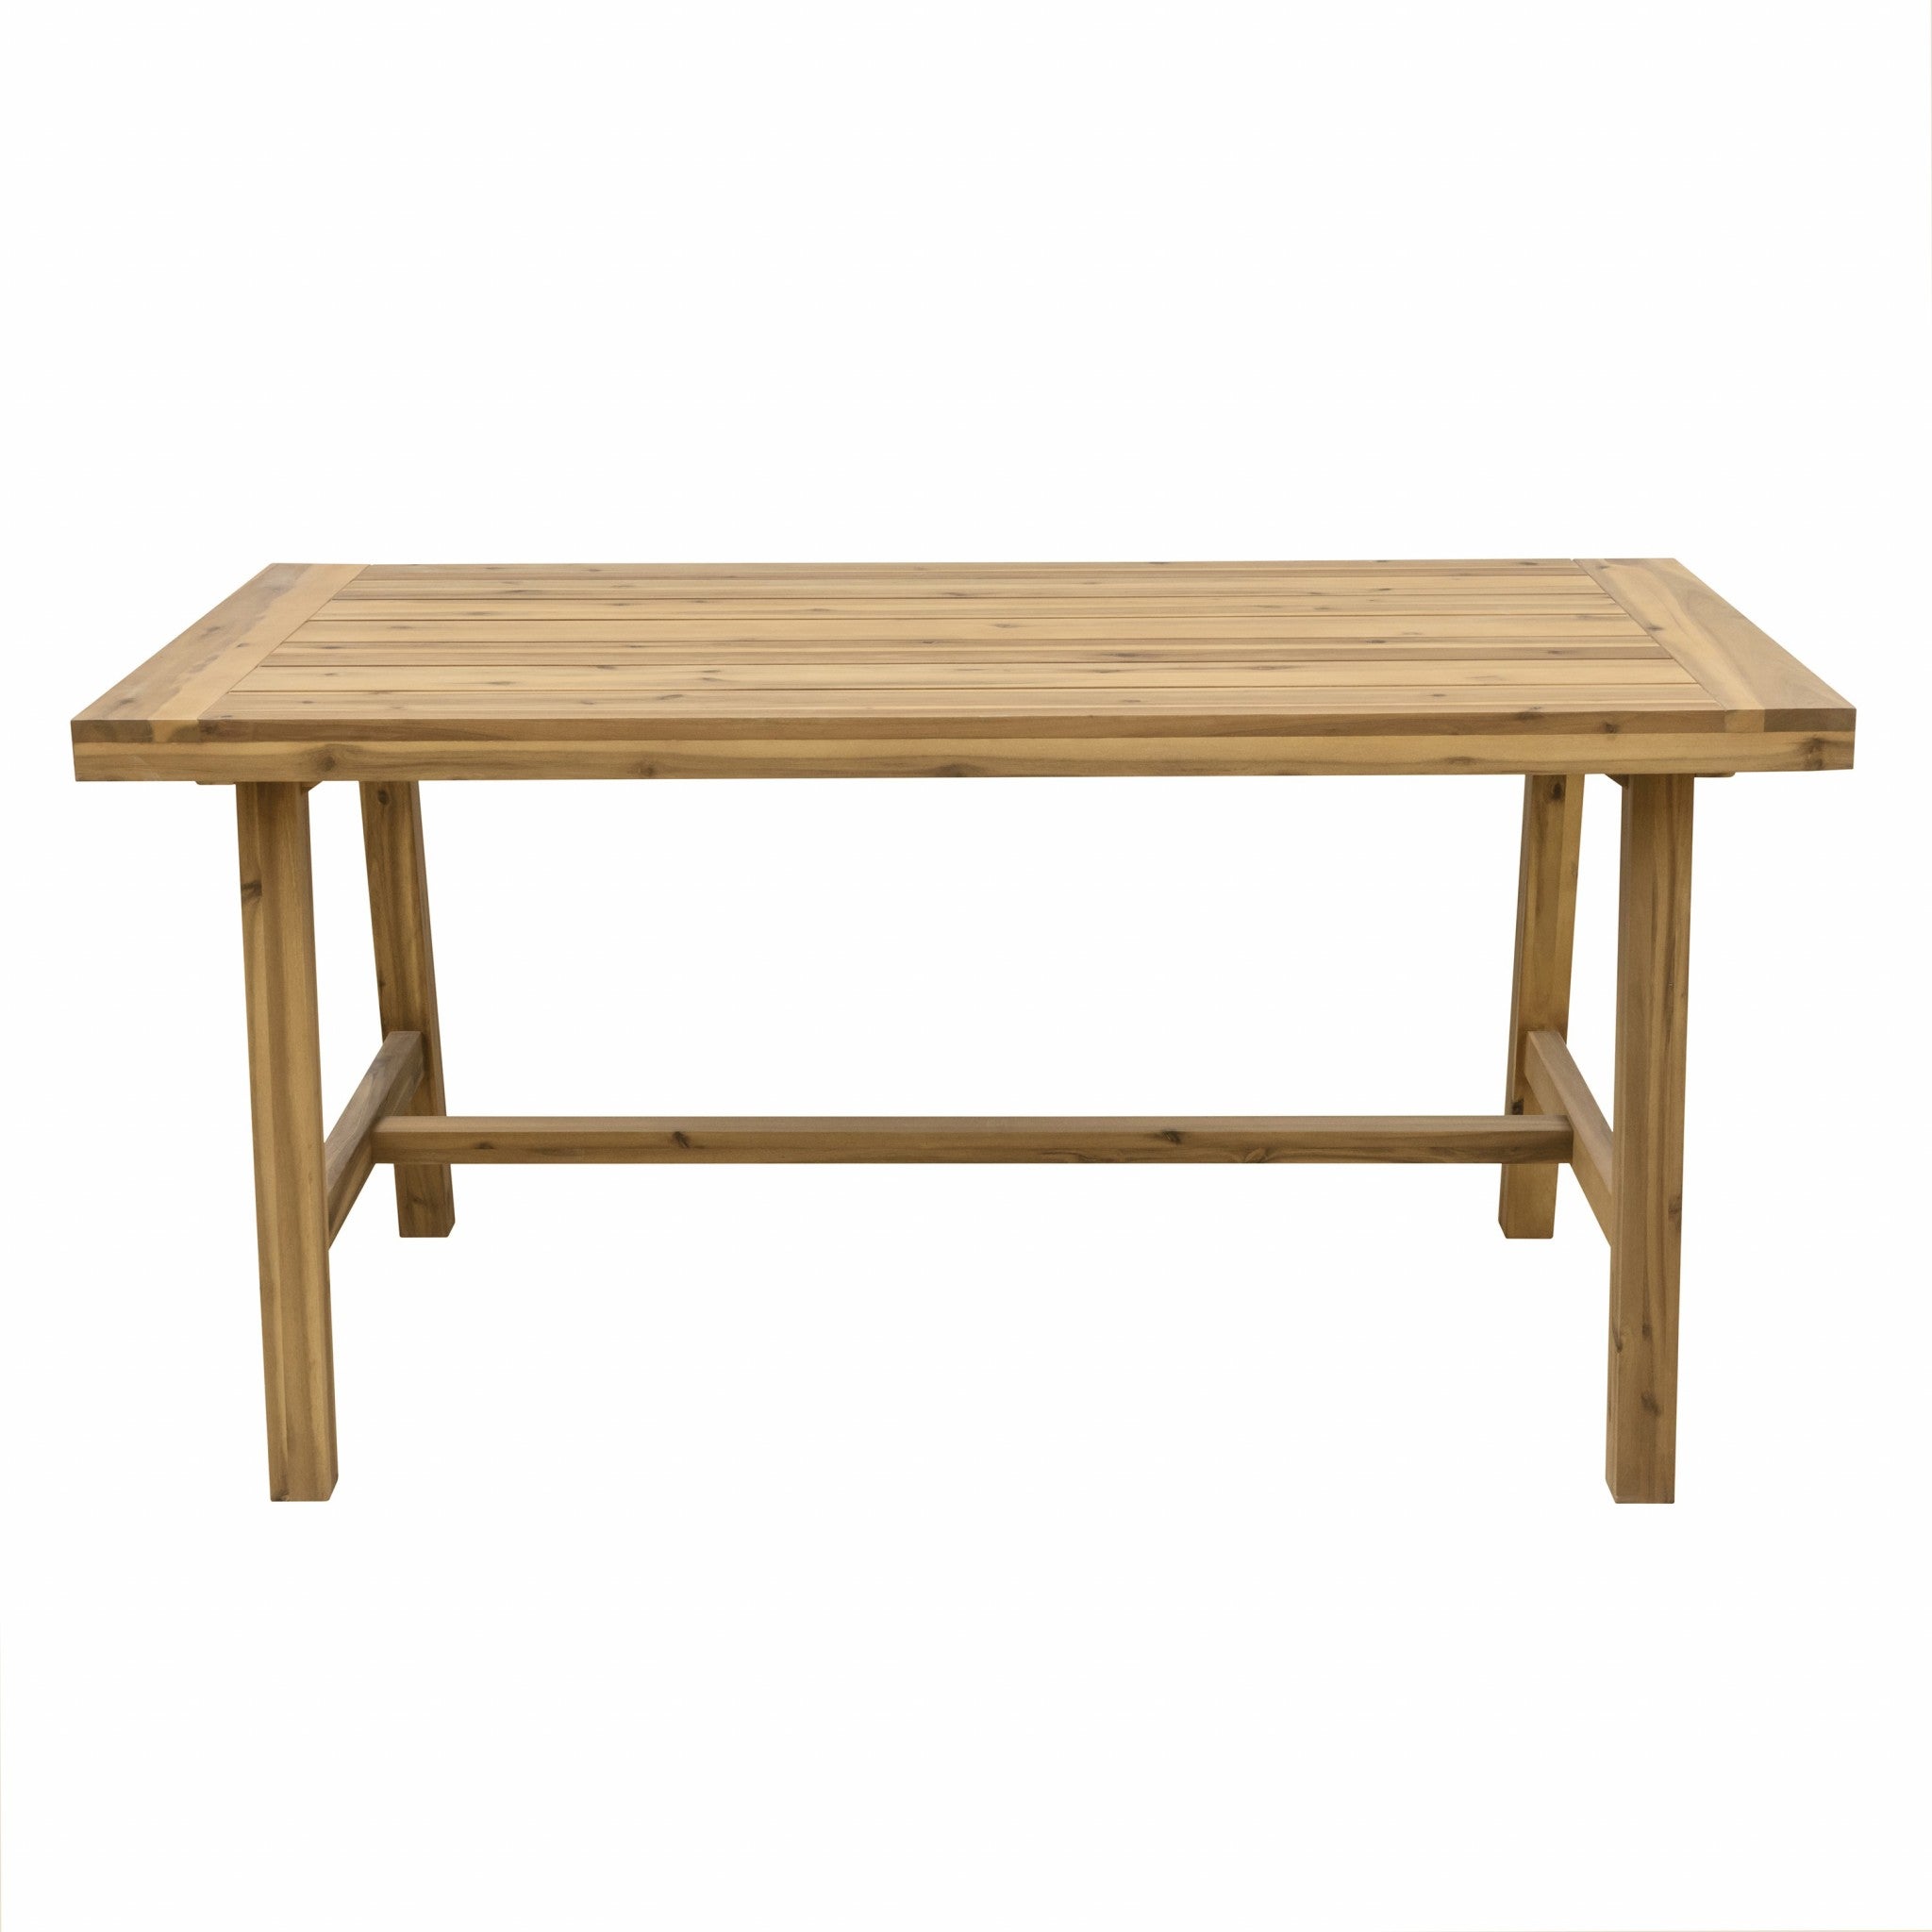 Natural Wood Dining Table With Leg Support